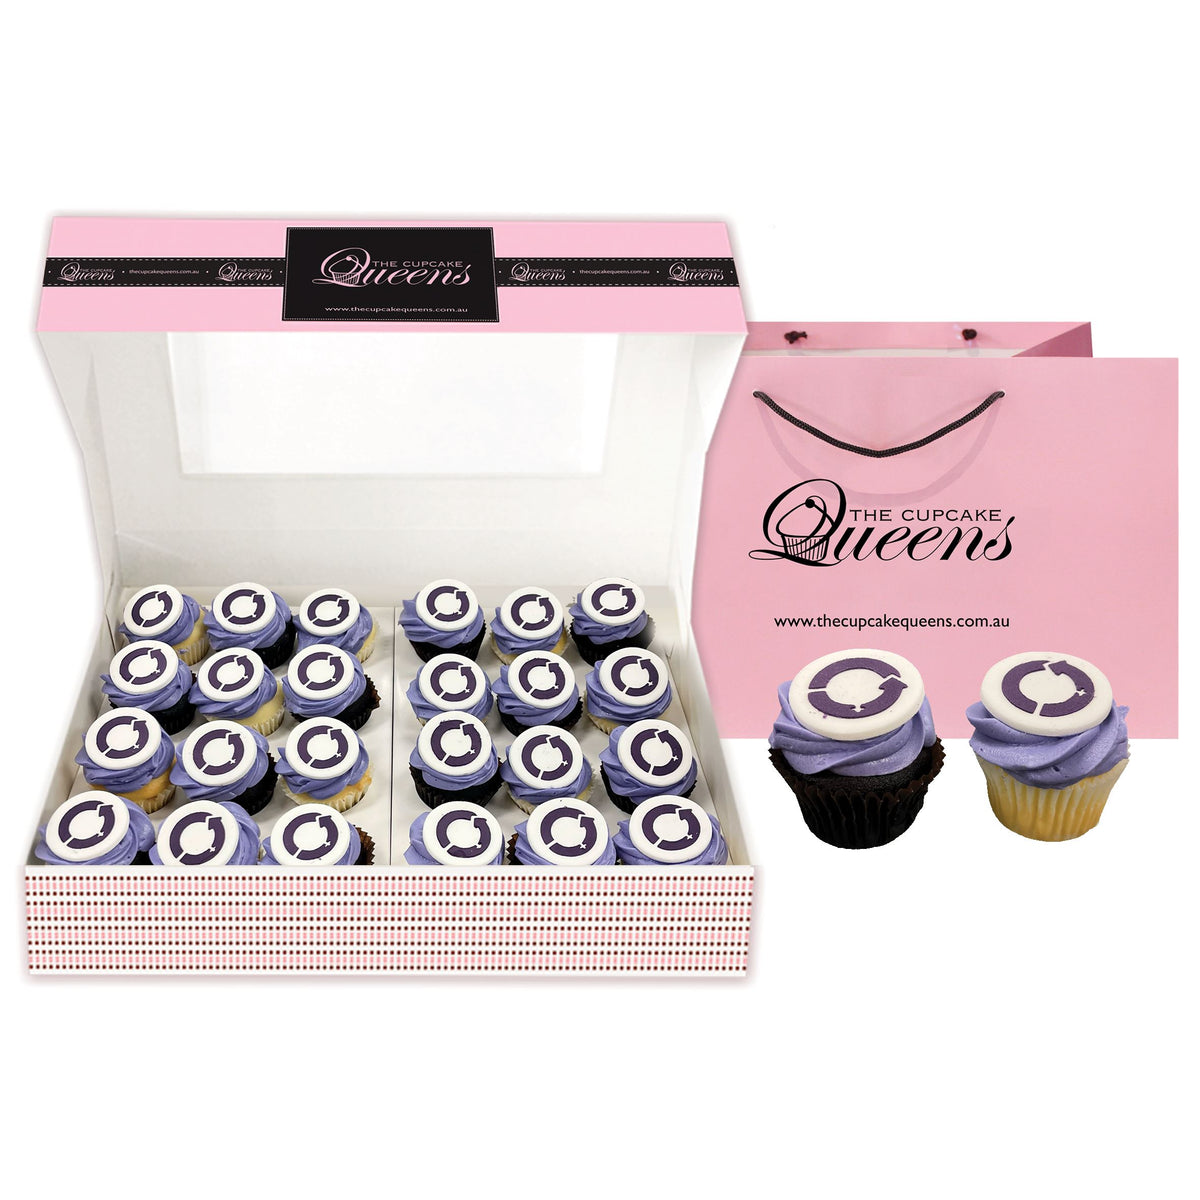 IWD 2023 Mini size Cupcake Giftbox Cupcakes Pre Selected Boxes The Cupcake Queens 